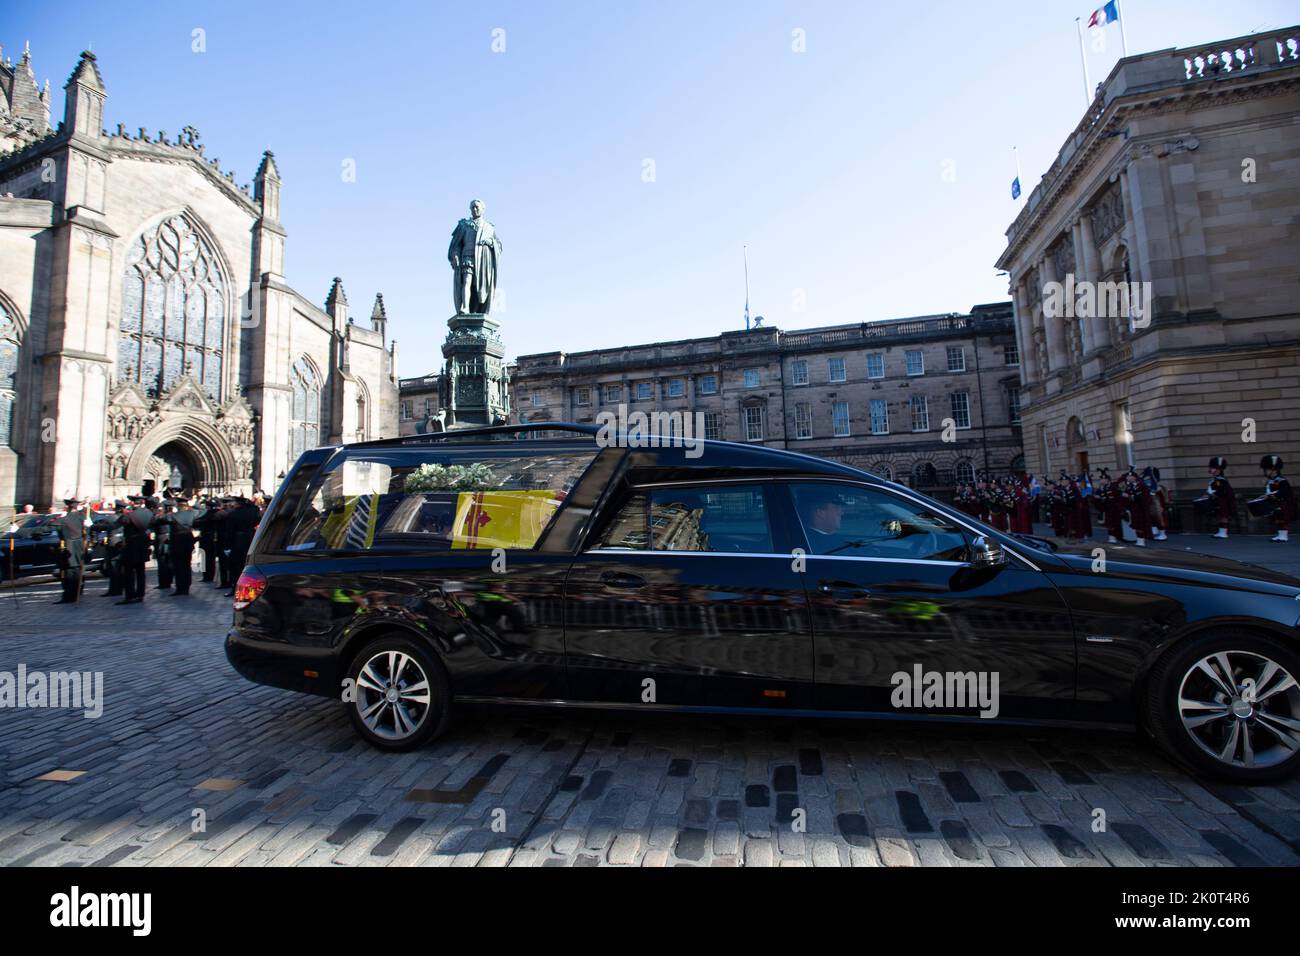 Edinburgh 13th September 20202. The coffin's of Queen Elizabeth II left St Gile's Cathedral in the Royal Mile in Edinburgh . The coffin's of Queen Elizabeth II will travel to England. The Queen died peacefully at Balmoral on 8th September 2022. Scotland Pic Credit: Pako Mera/Alamy Live News Stock Photo